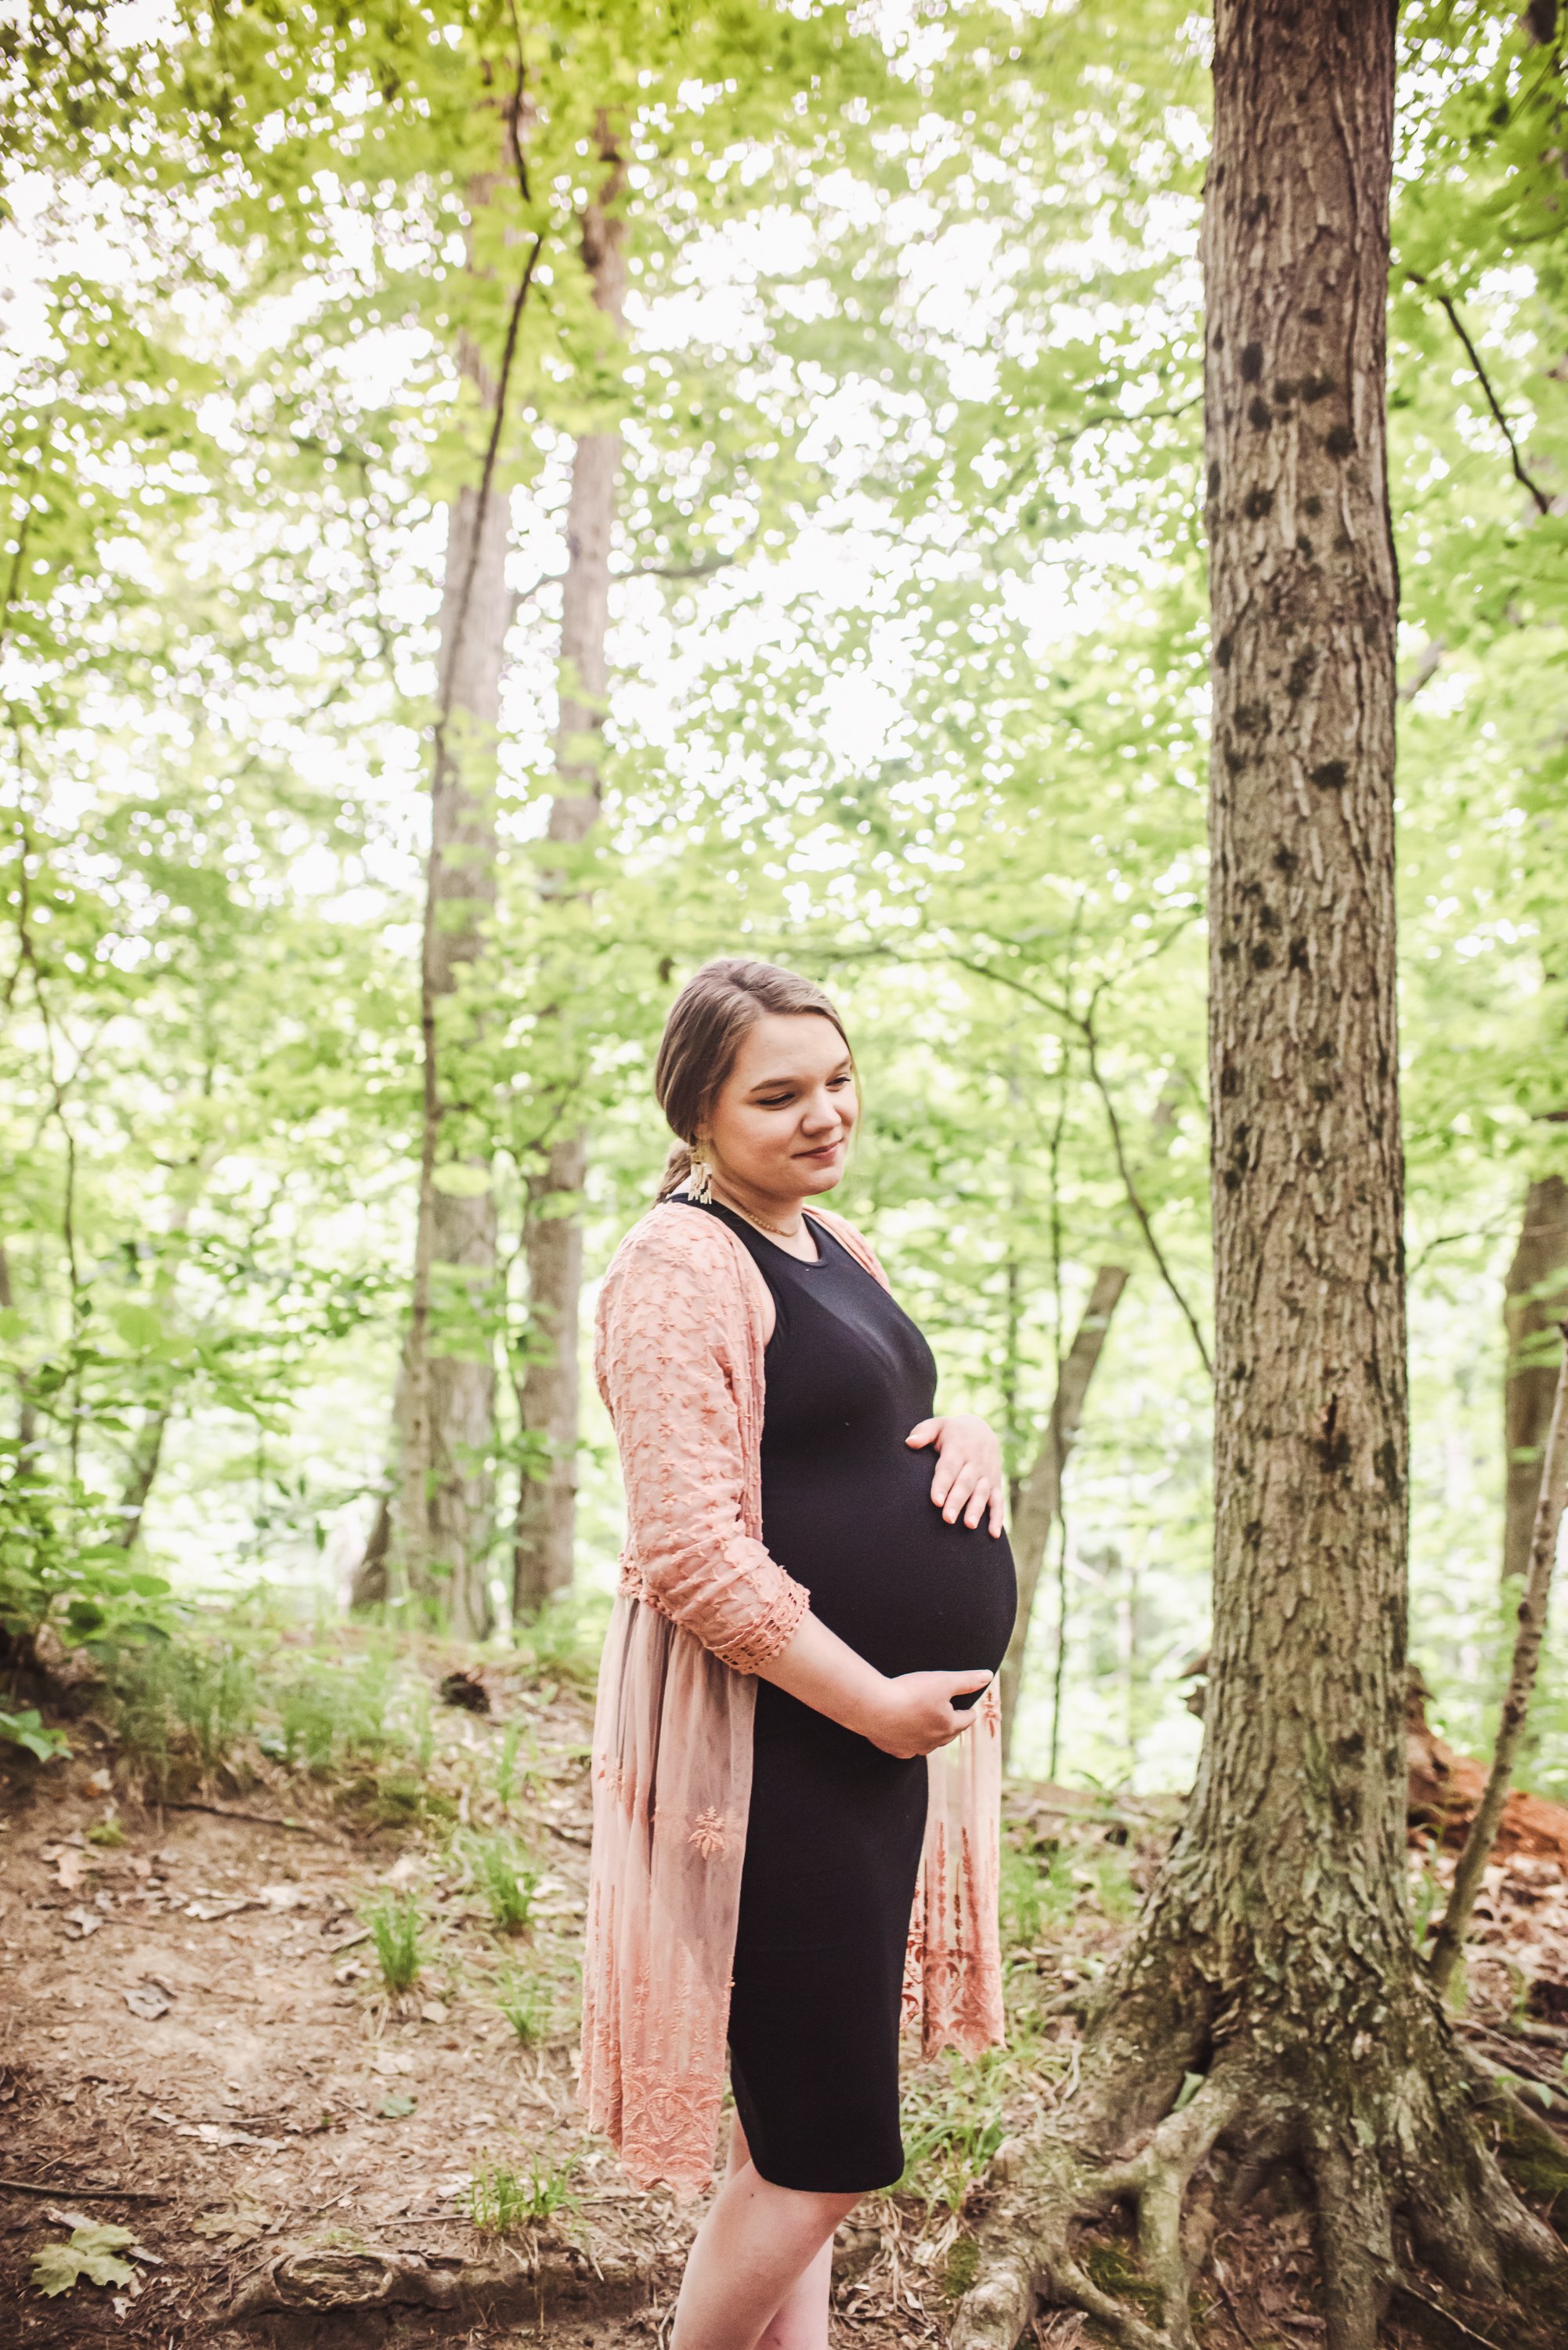 Baby Walker Maternity Session 2022 Randi Armstrong Photography-19.jpg